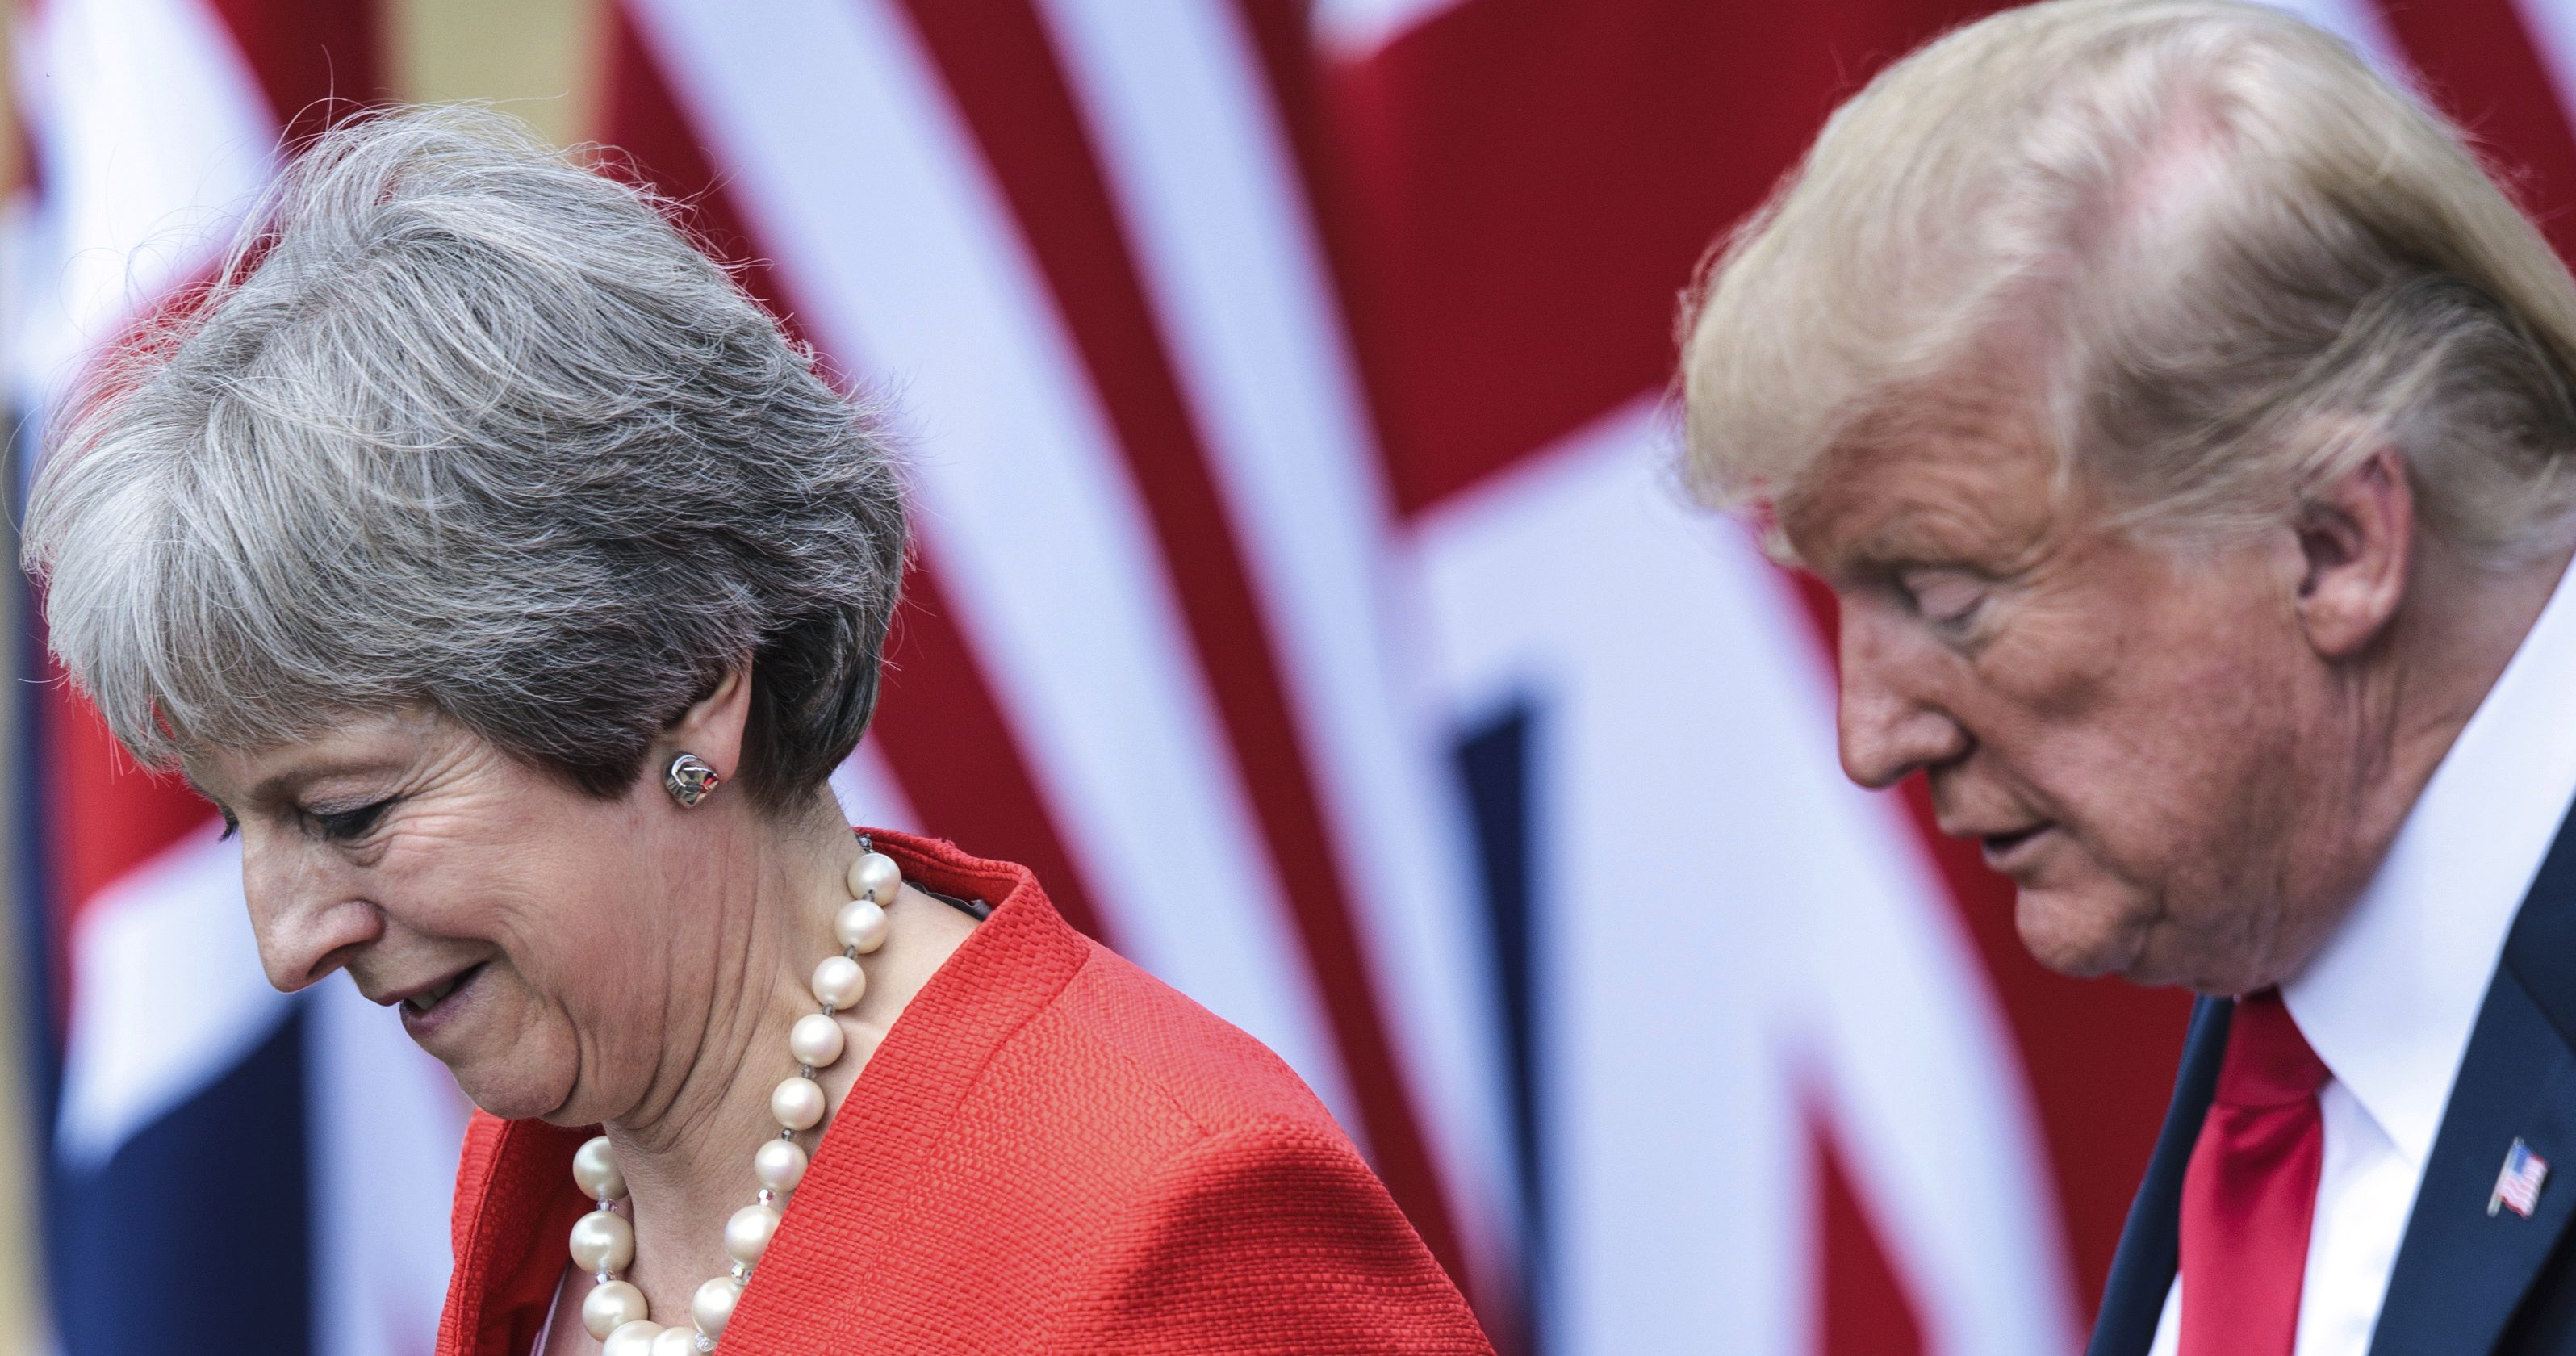 British Prime Minister Theresa May, left, and U.S. President Donald Trump attend a joint press conference following their meeting at Chequers, in Buckinghamshire, England, Friday, July 13, 2018.